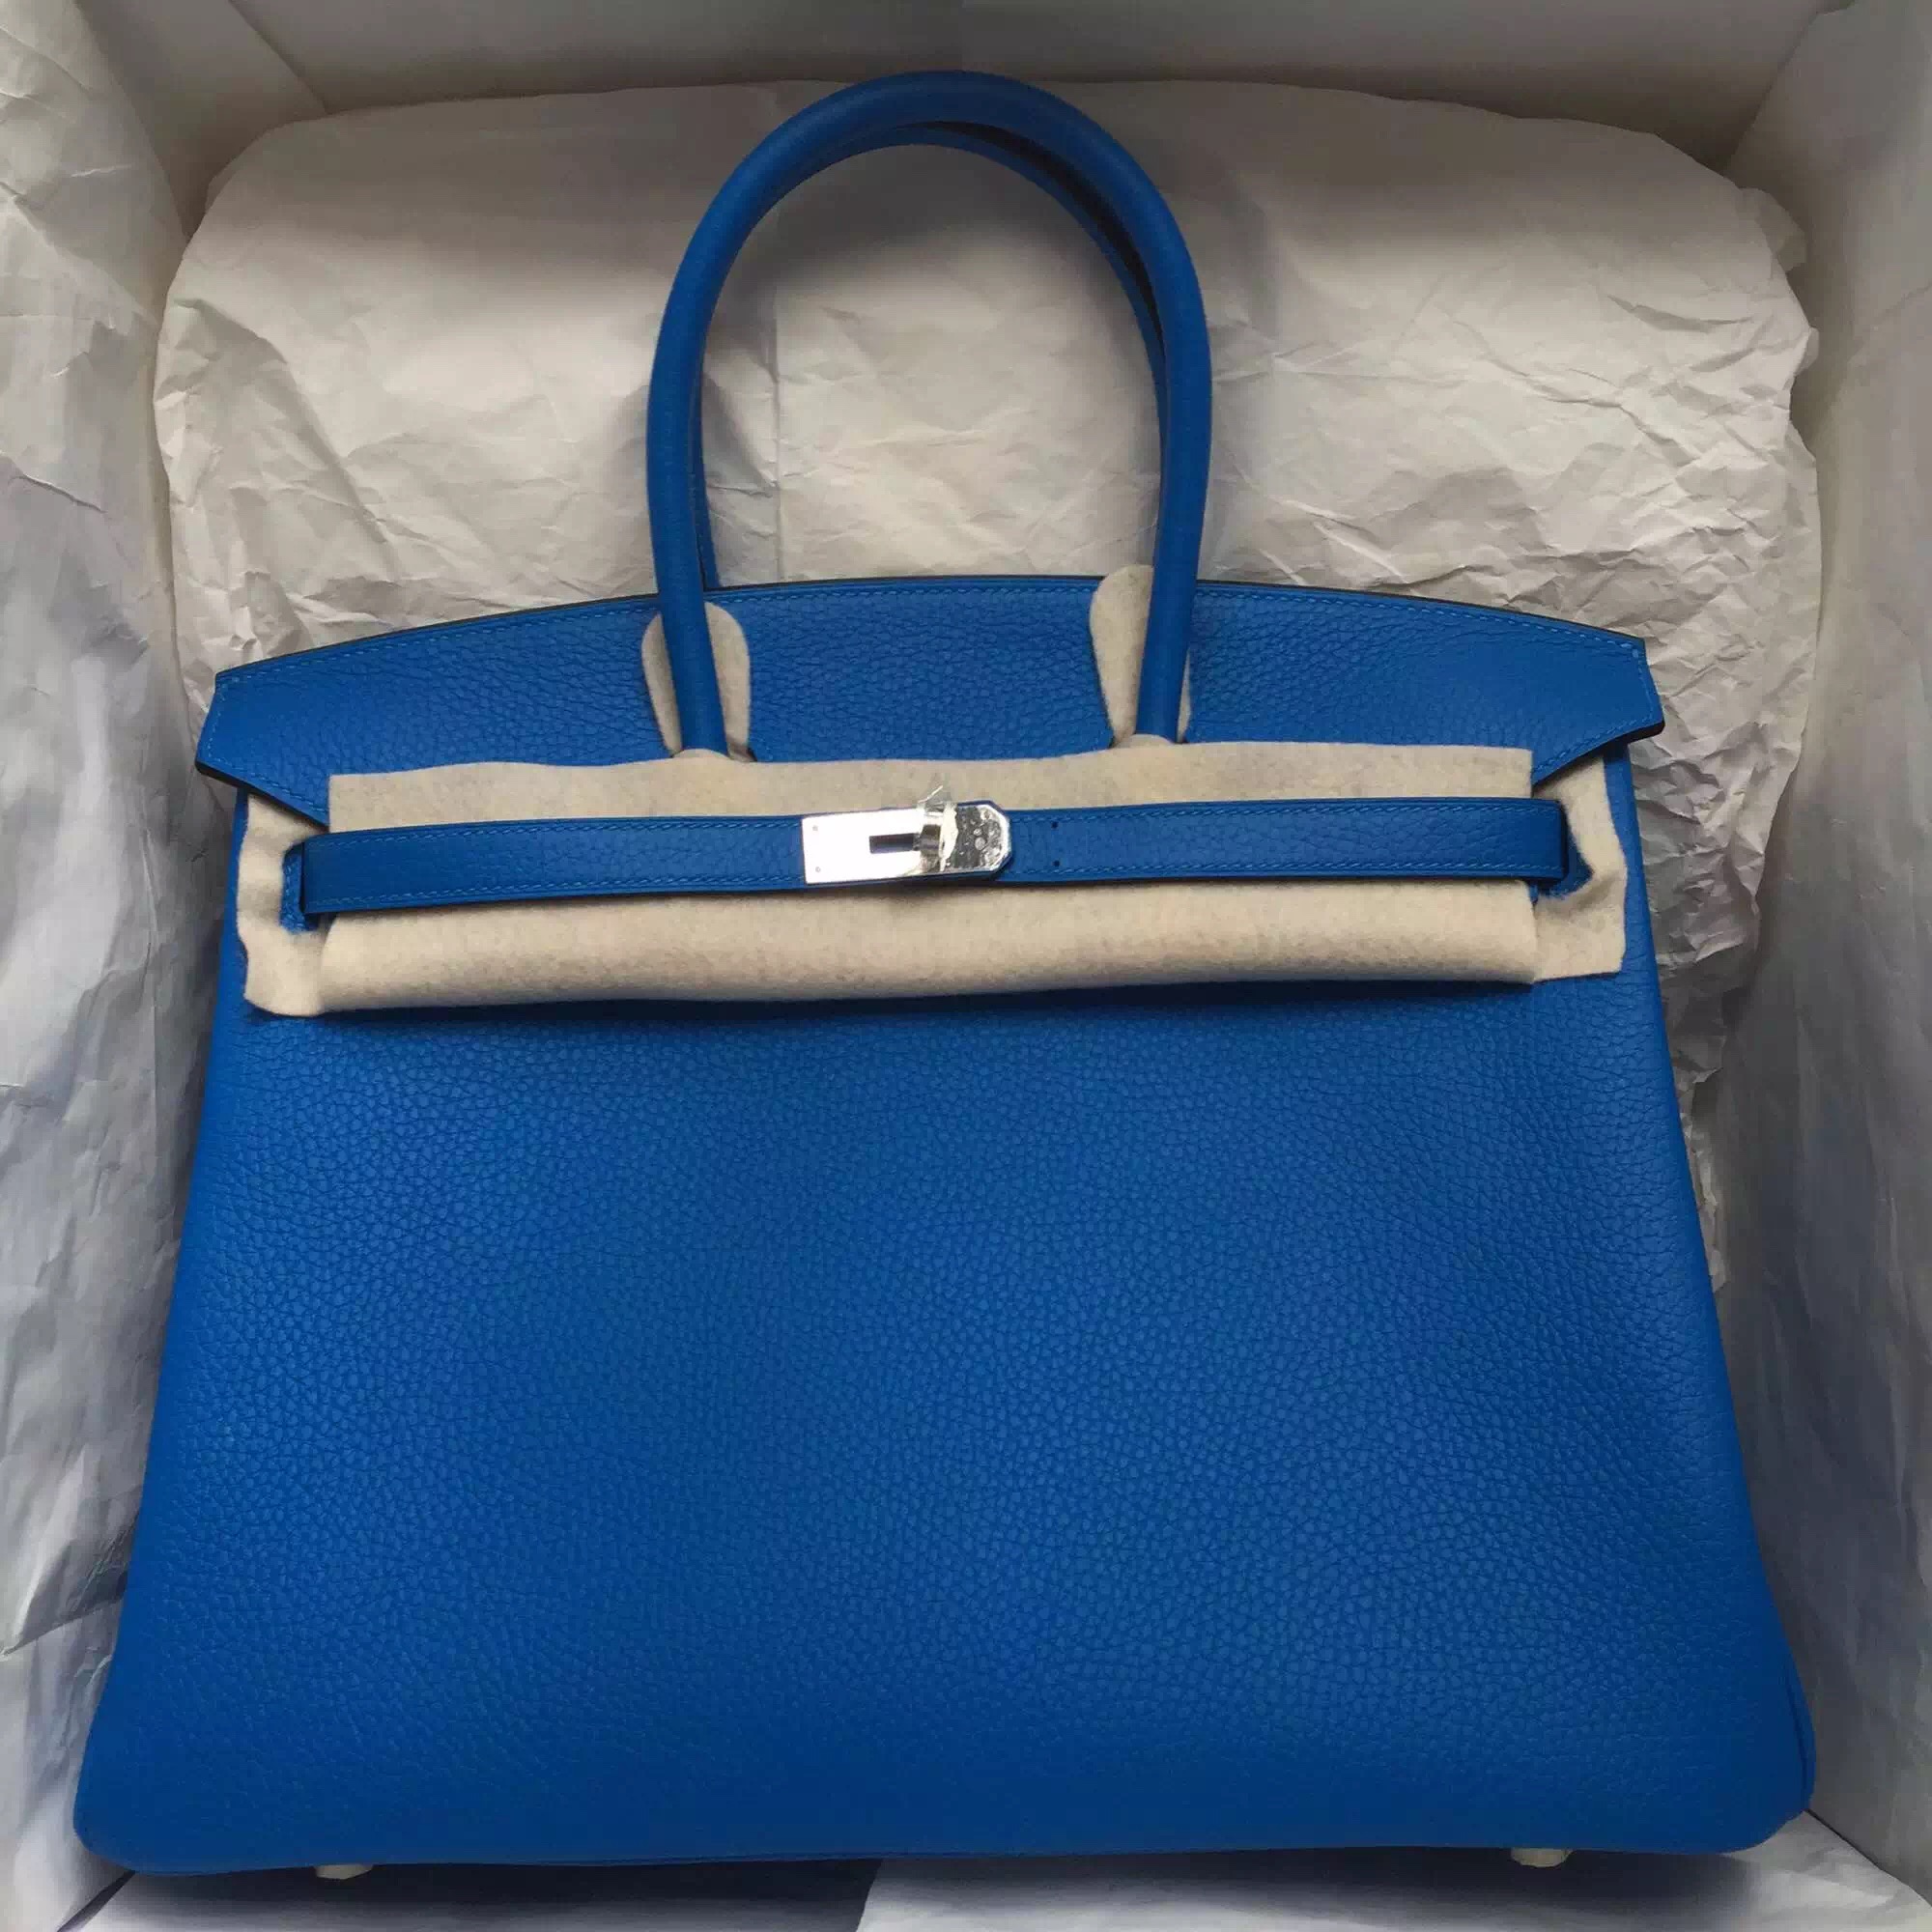 hermes leather bags in france, how much birkin bag